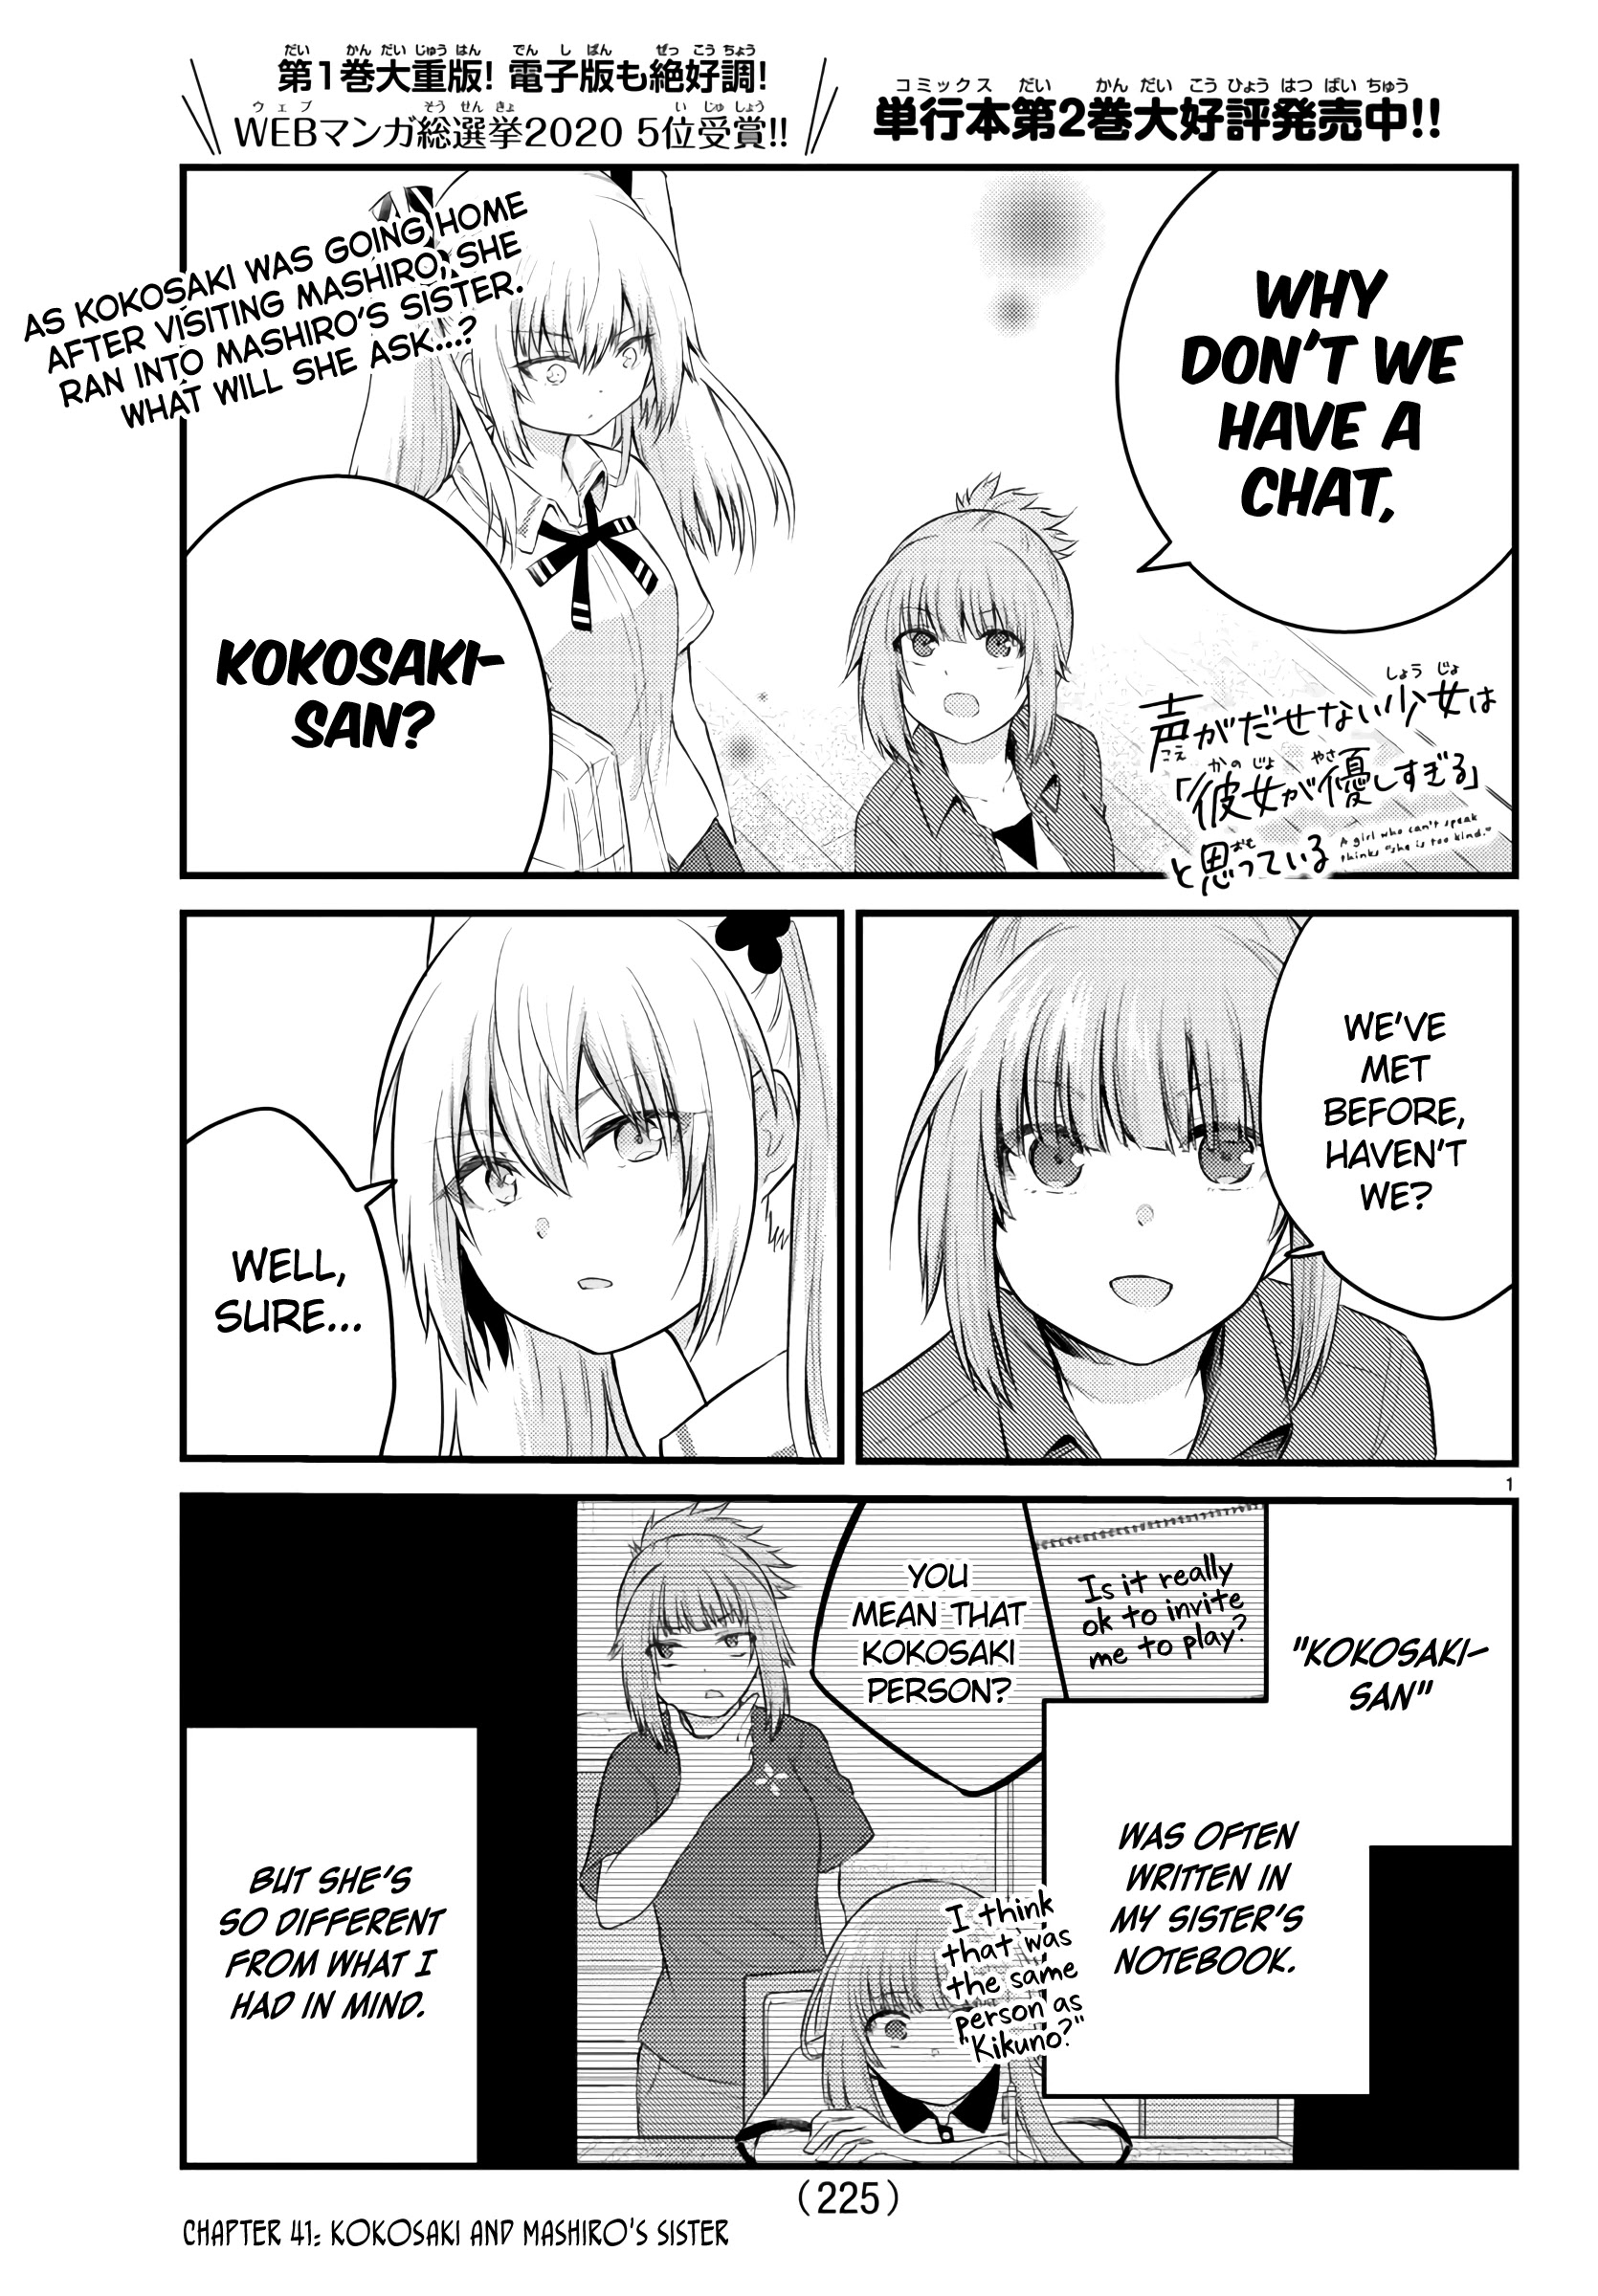 The Mute Girl And Her New Friend (Serialization) Chapter 41: Kokosaki And Mashiro's Sister - Picture 1